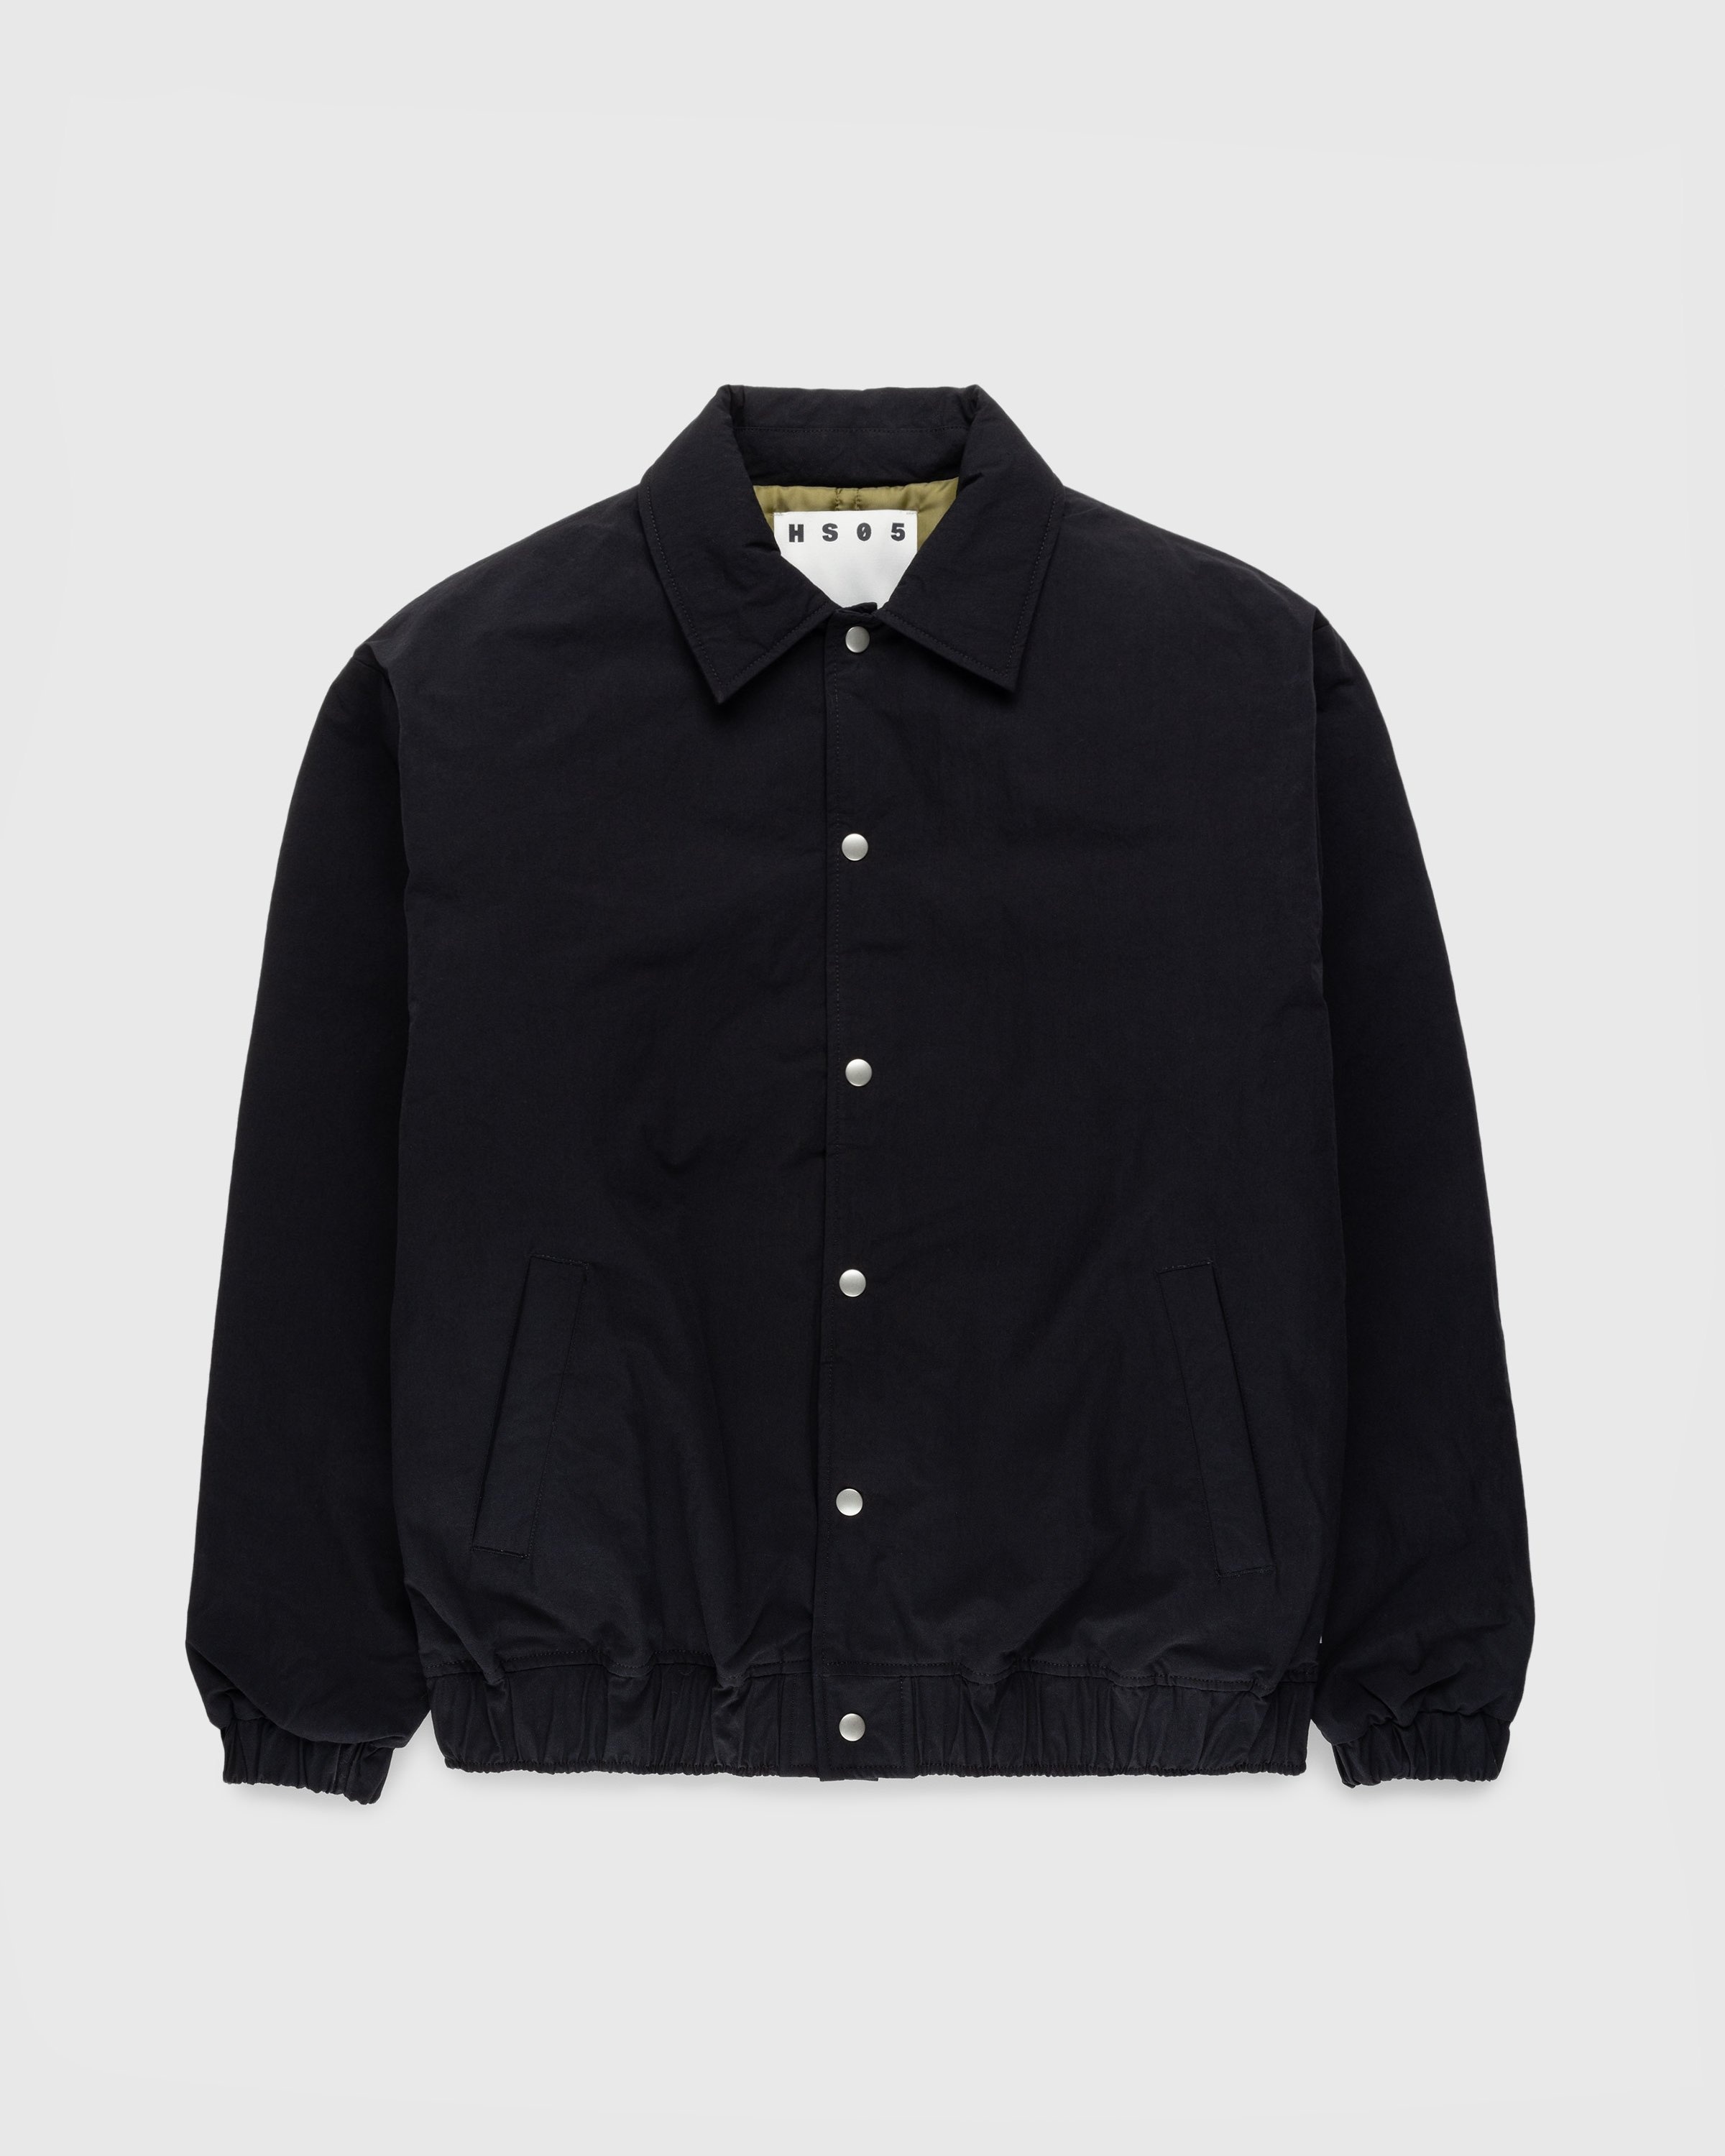 Highsnobiety HS05 – Reverse Piping Insulated Jacket Black - Outerwear - Black - Image 1